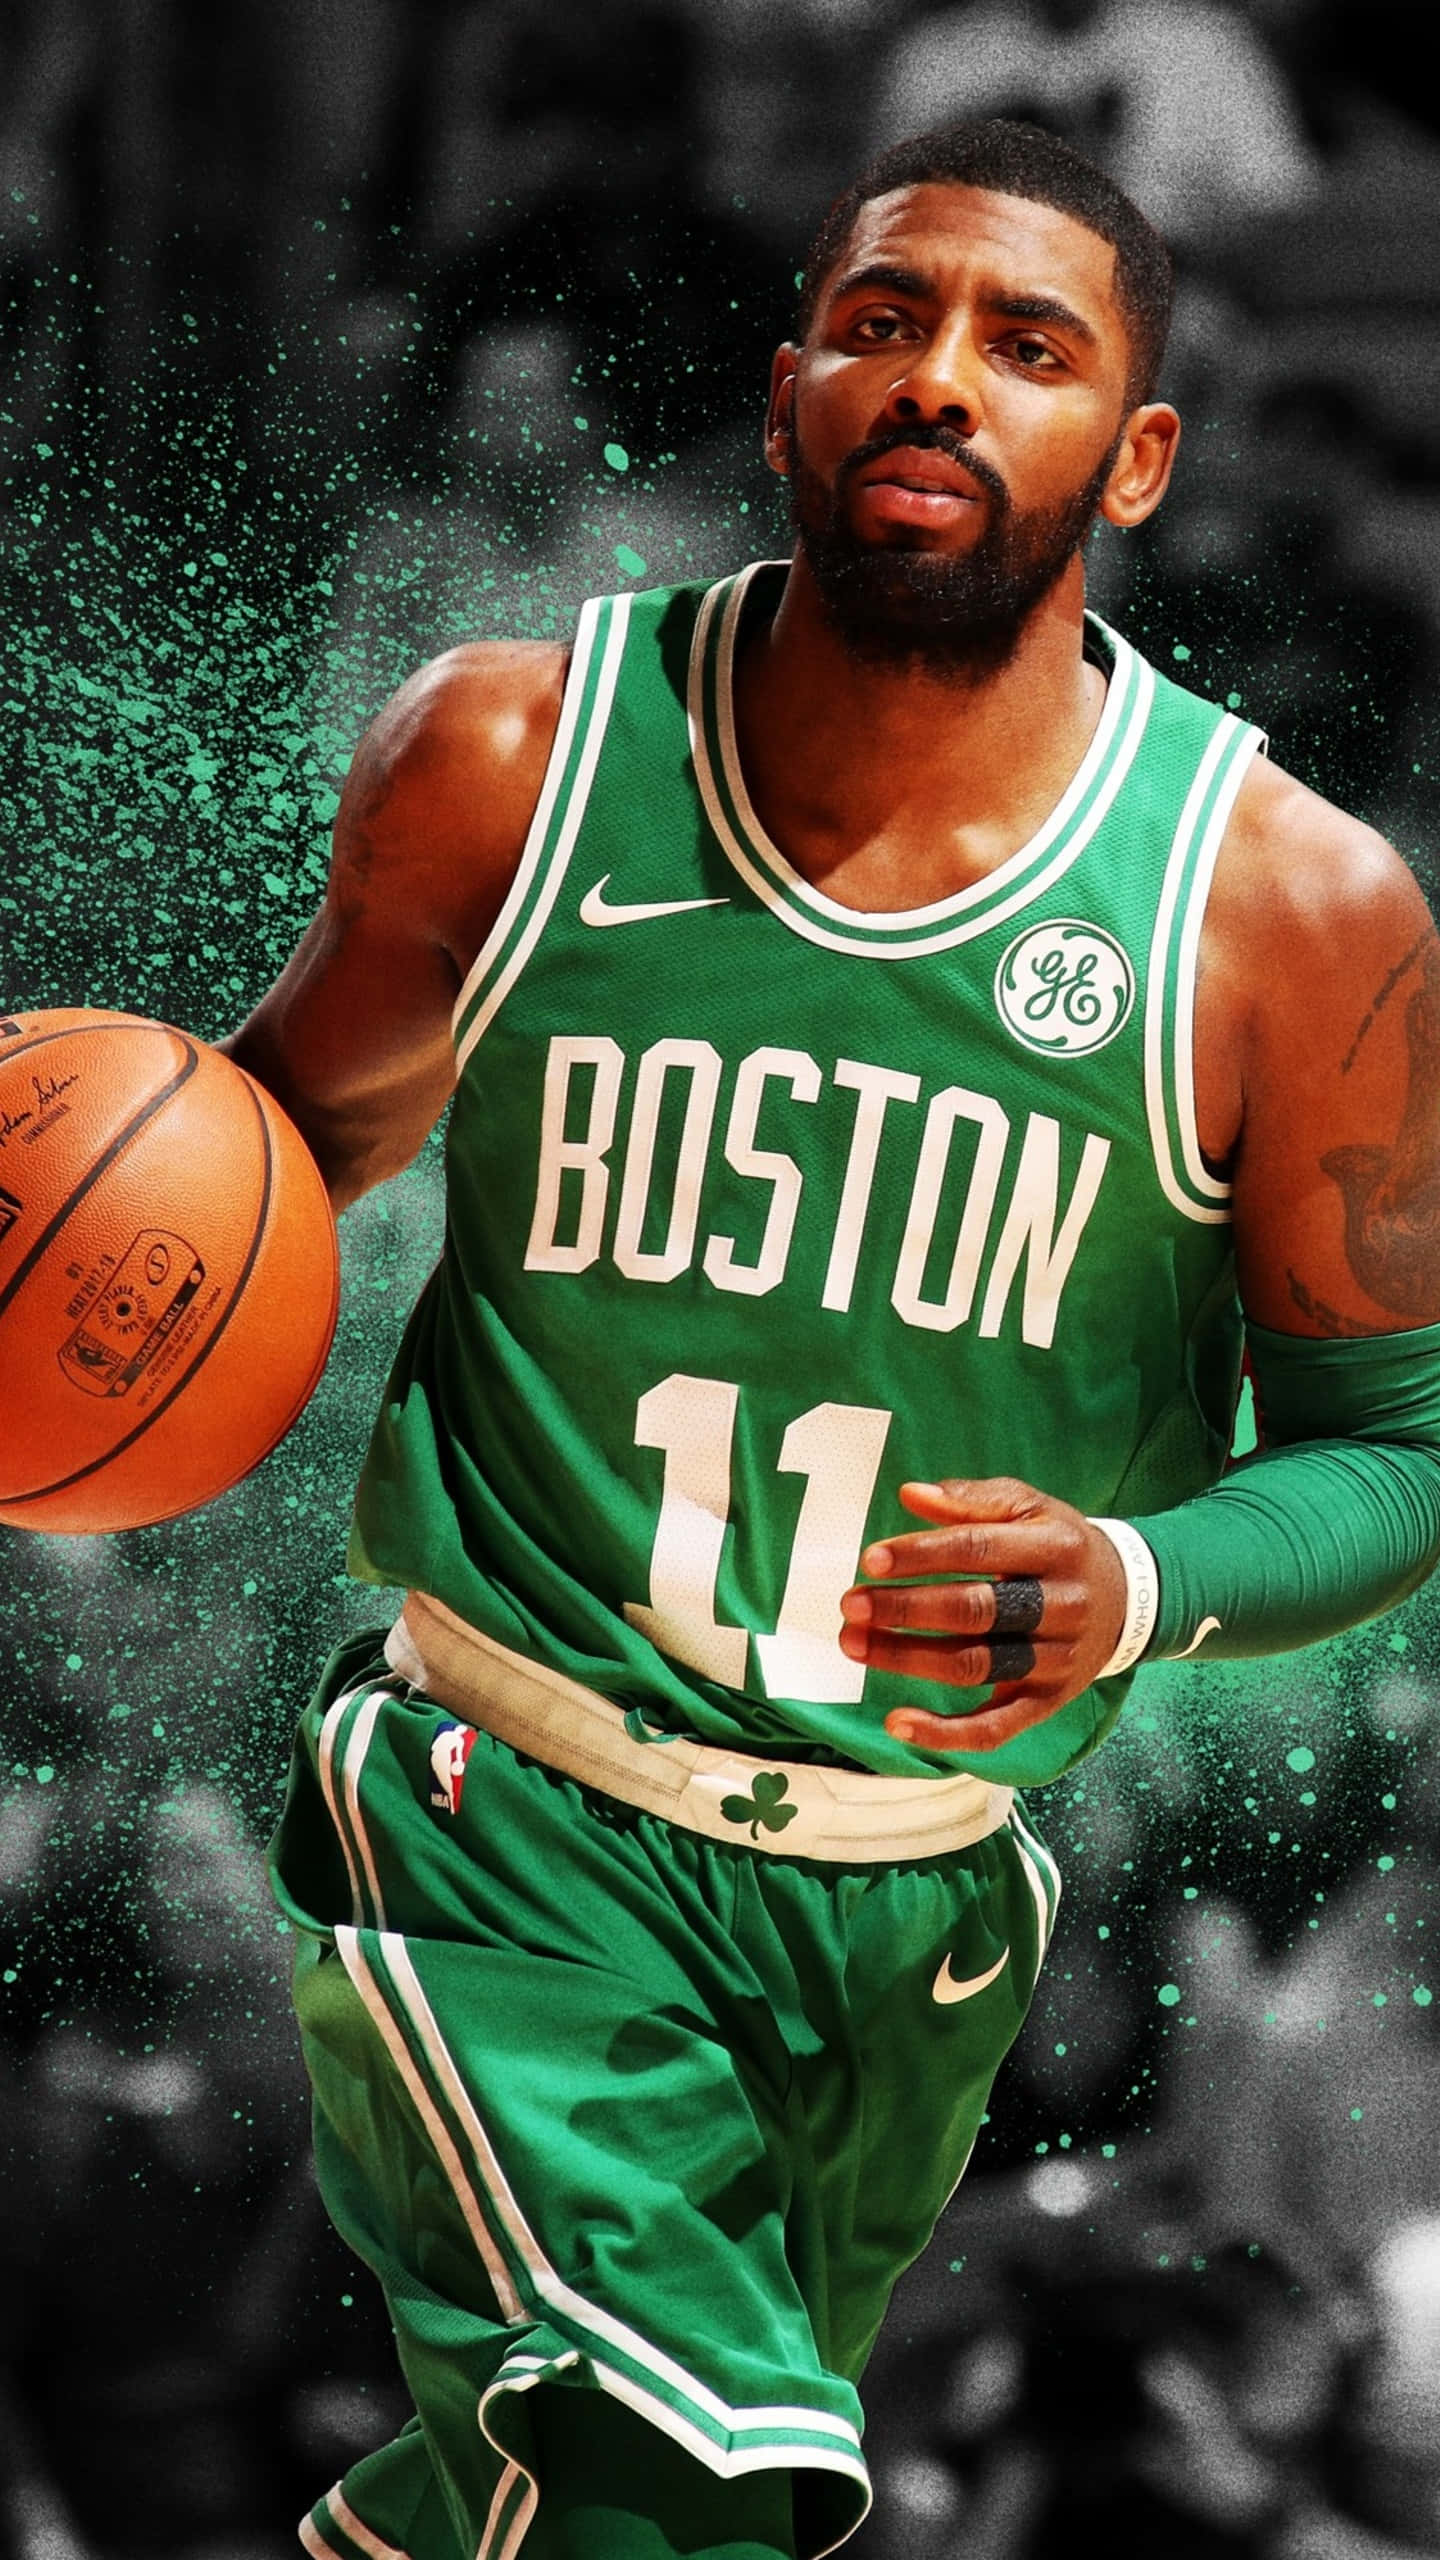 Kyrie Irving Cool in Action Wallpaper